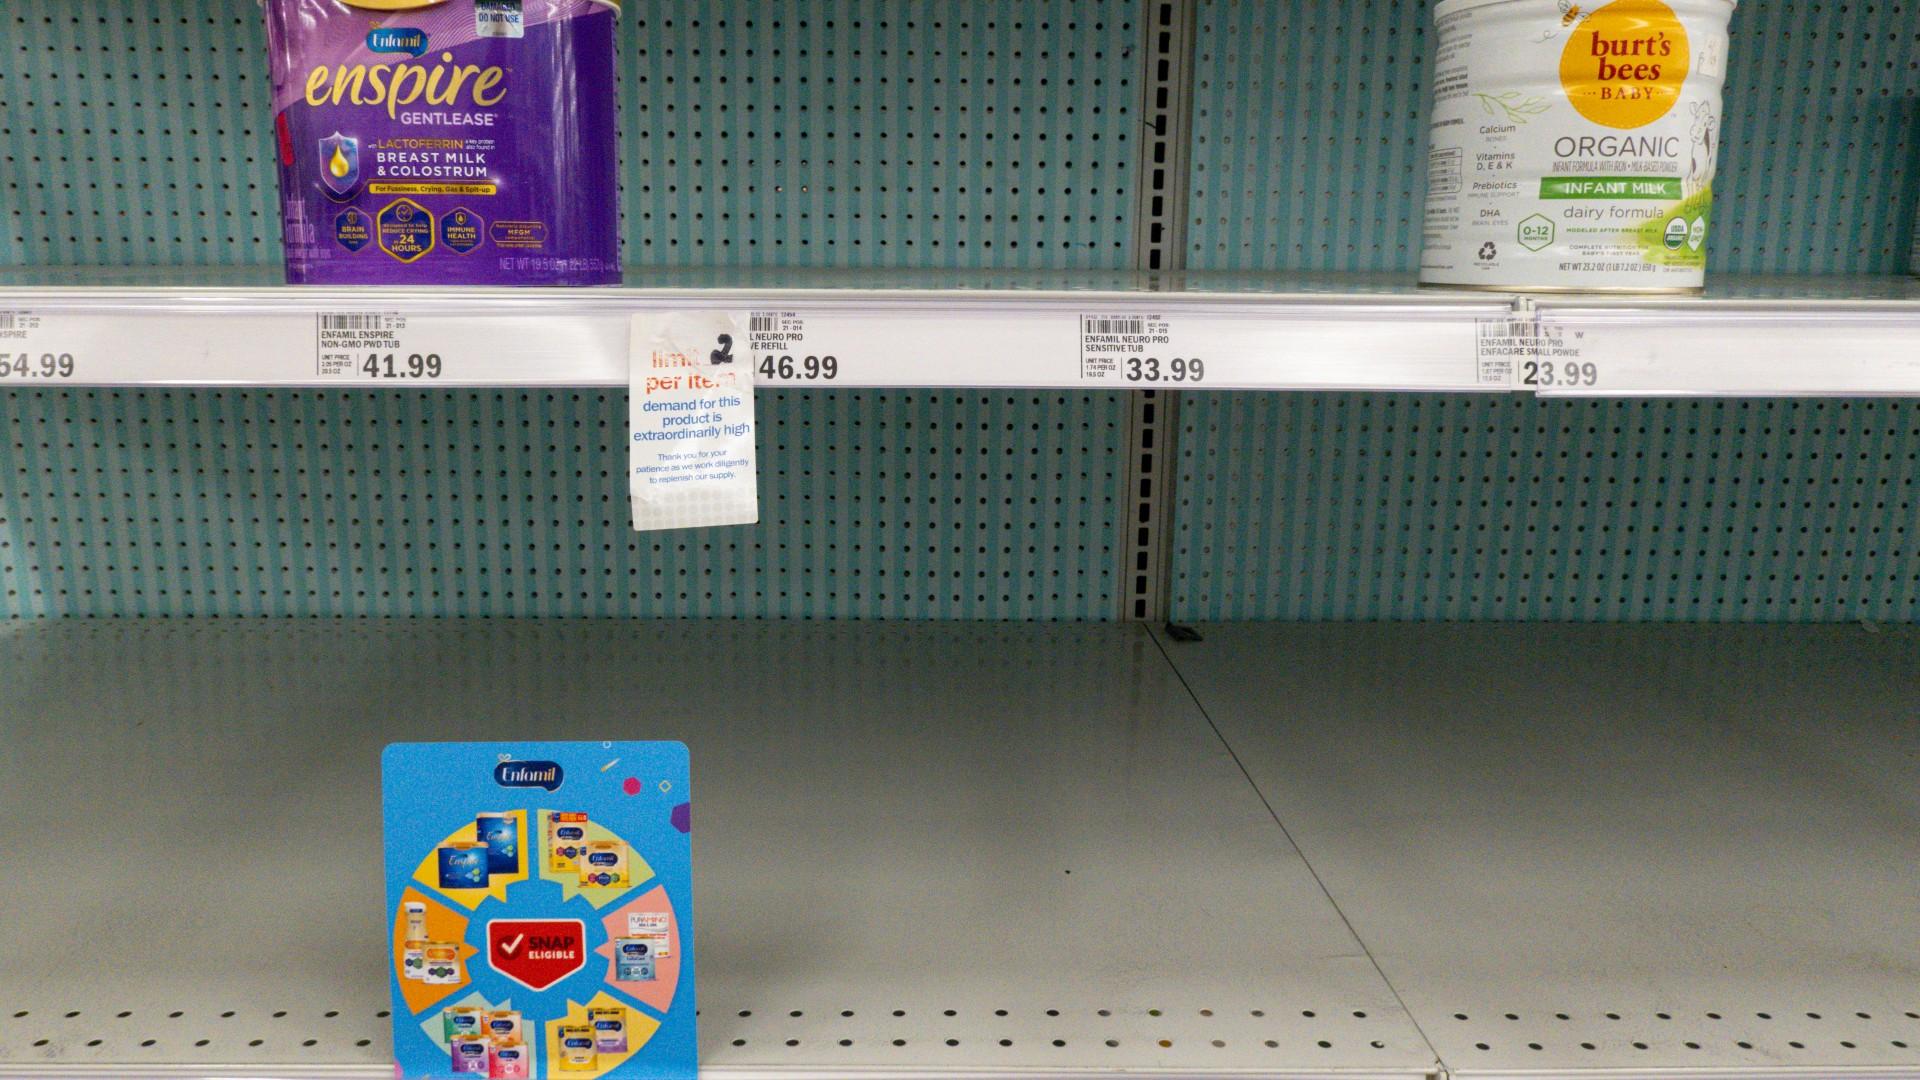 Baby formula is displayed on the shelves of a grocery store in Carmel, Ind. on May 10, 2022. (AP Photo / Michael Conroy, File)